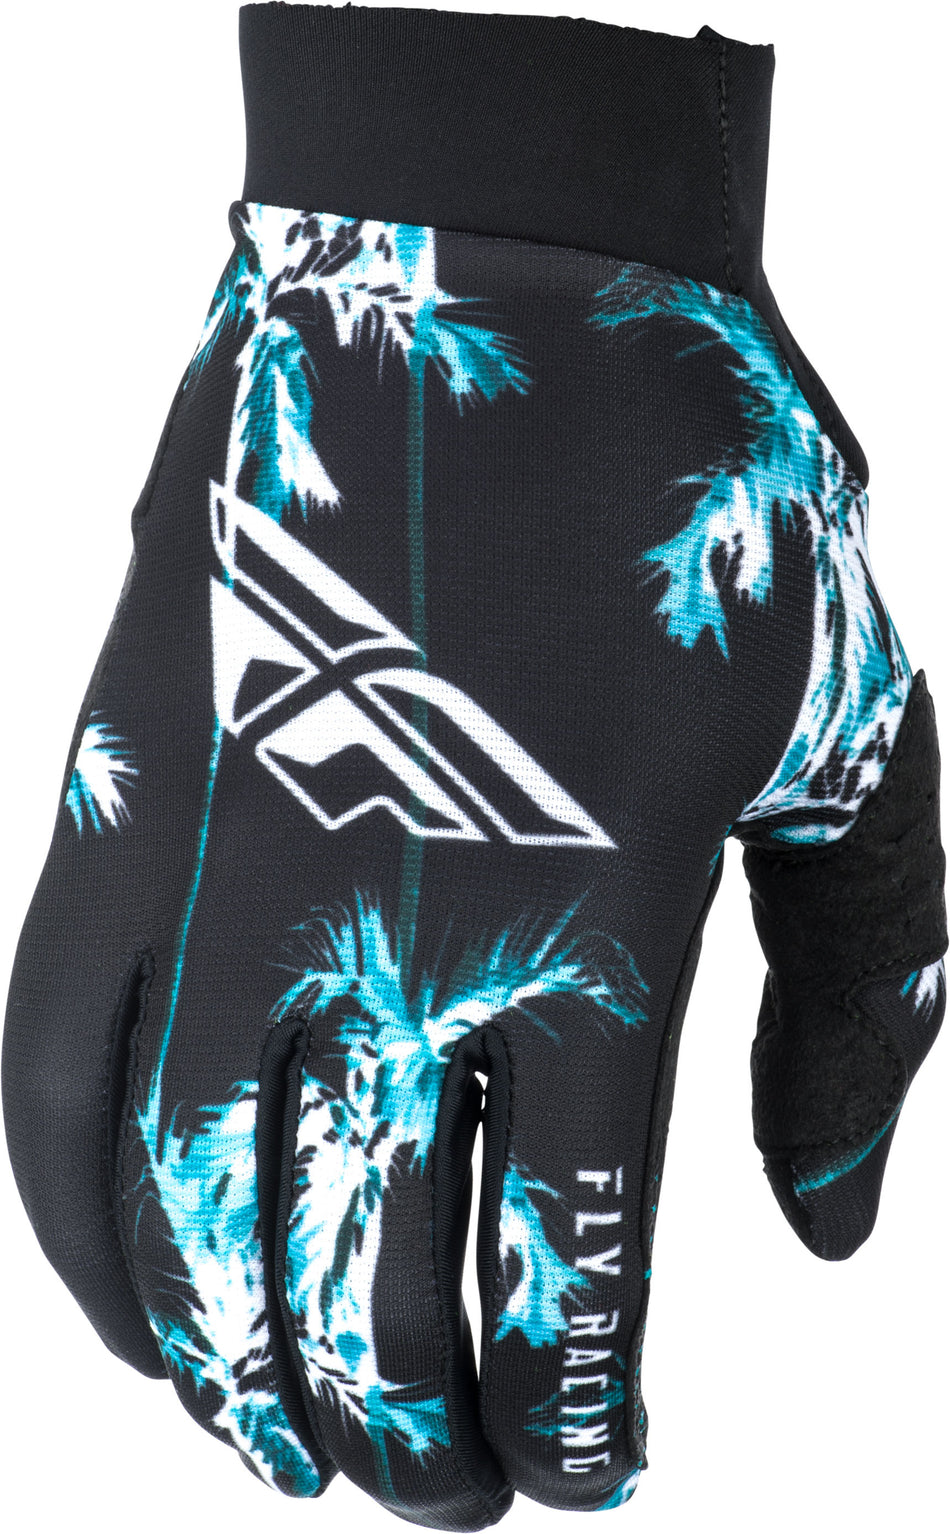 FLY RACING Pro Lite Paradise Gloves Teal/Black Sz 08 372-81908